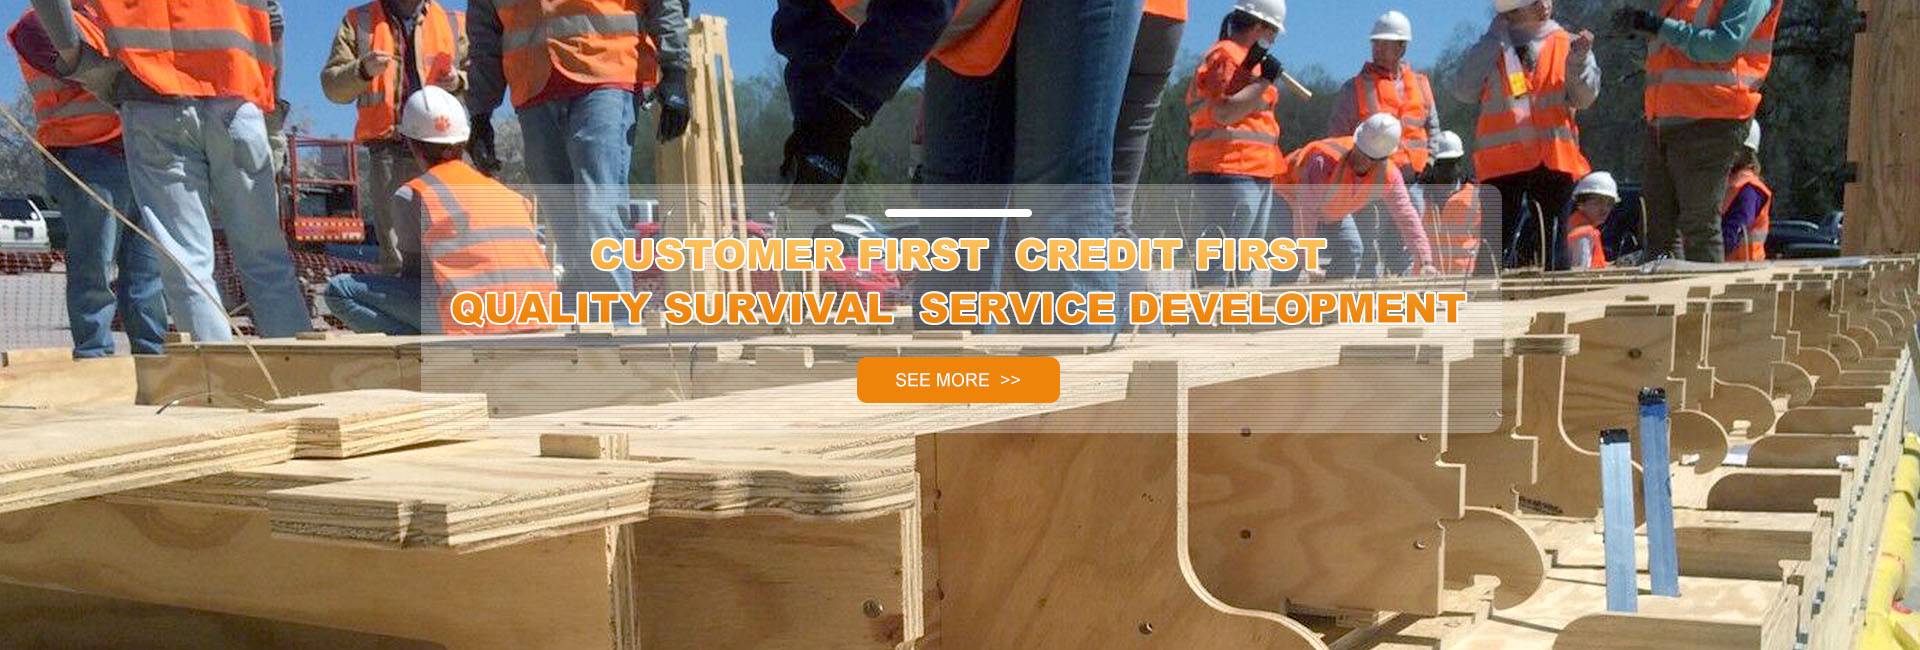 Household First, Credit First, Quality Survival, Service Development